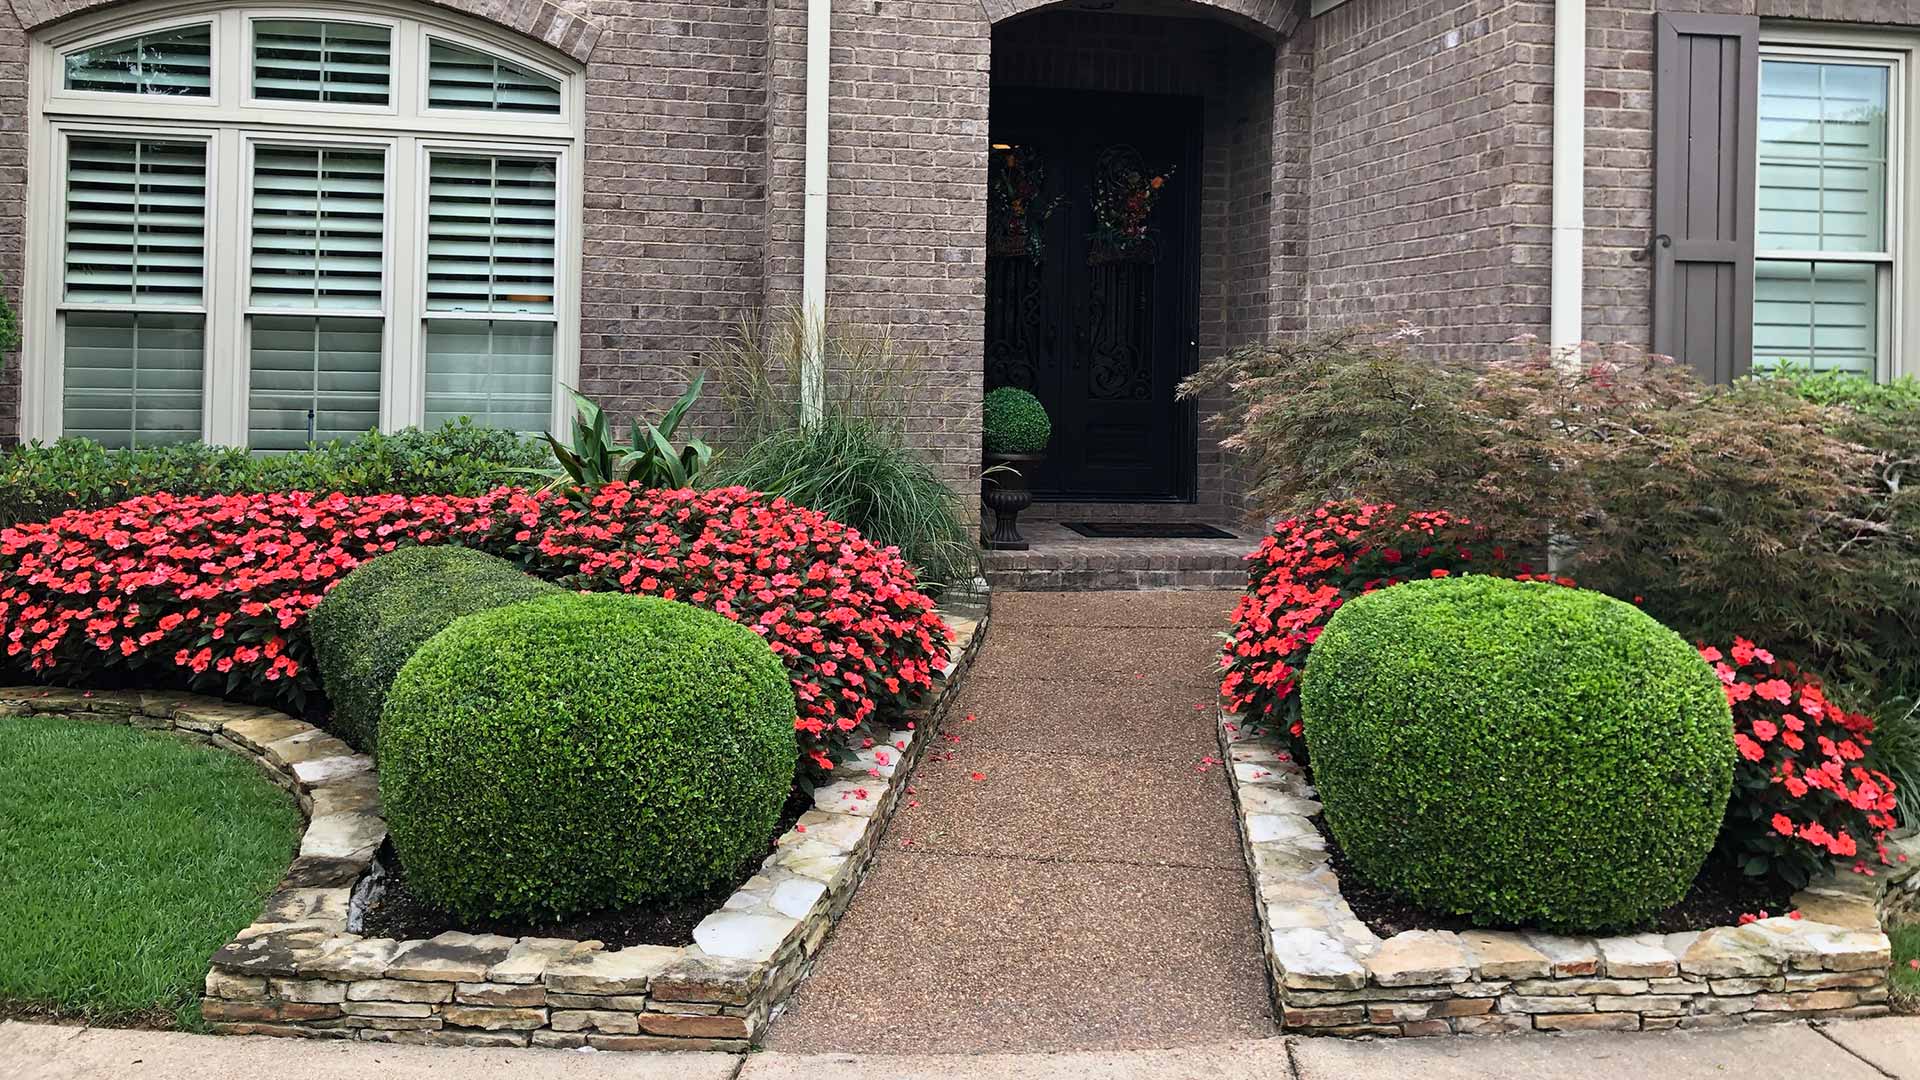 Trimmed landscape bushes and trees around a home's doorway in Memphis, TN.